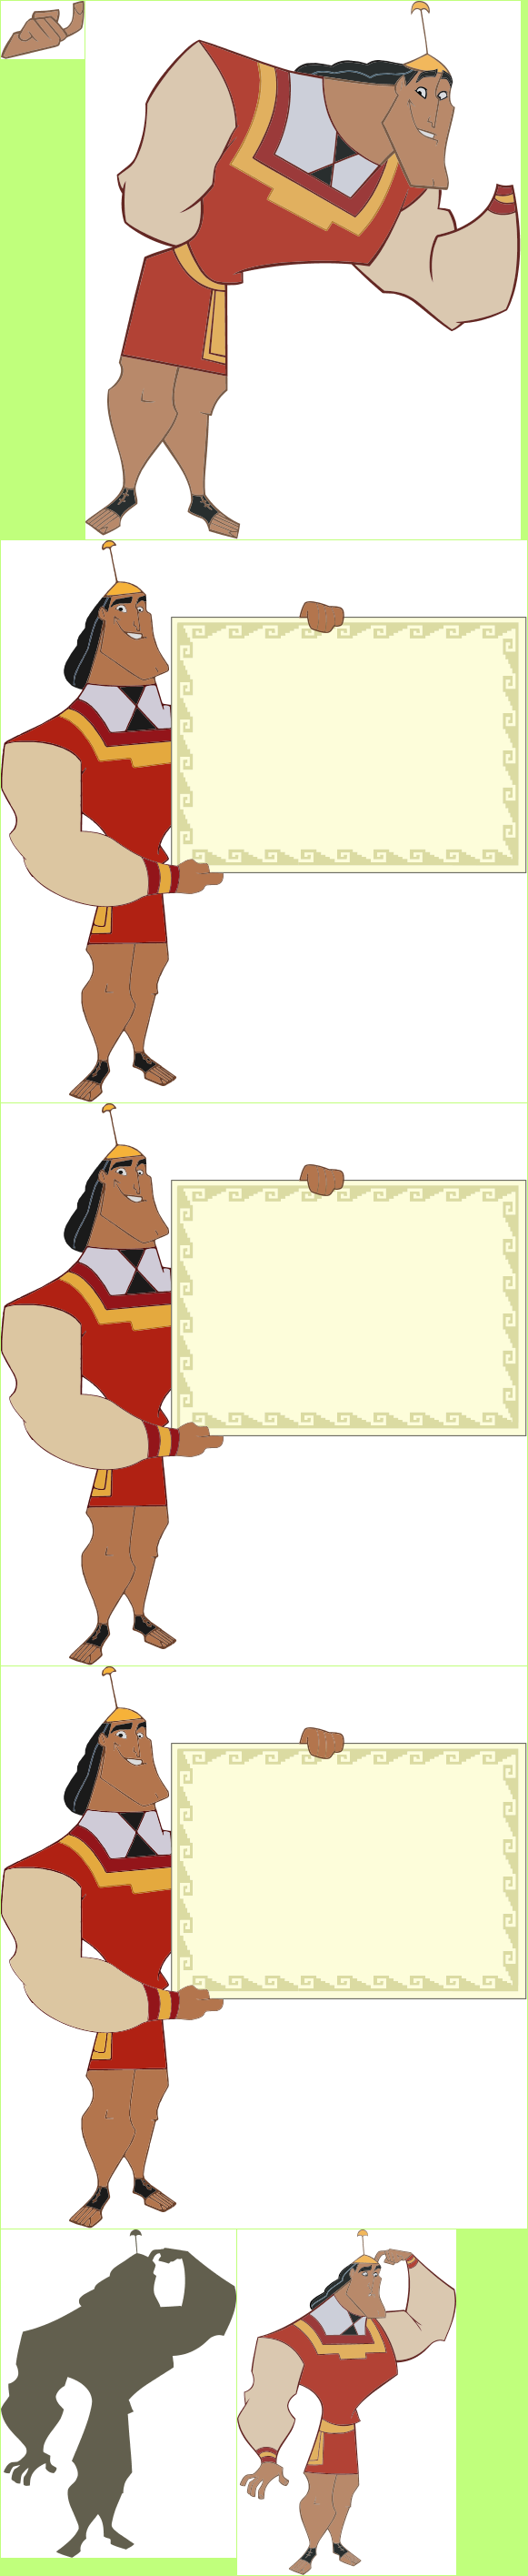 Kuzco: Quest for Gold - Kronk